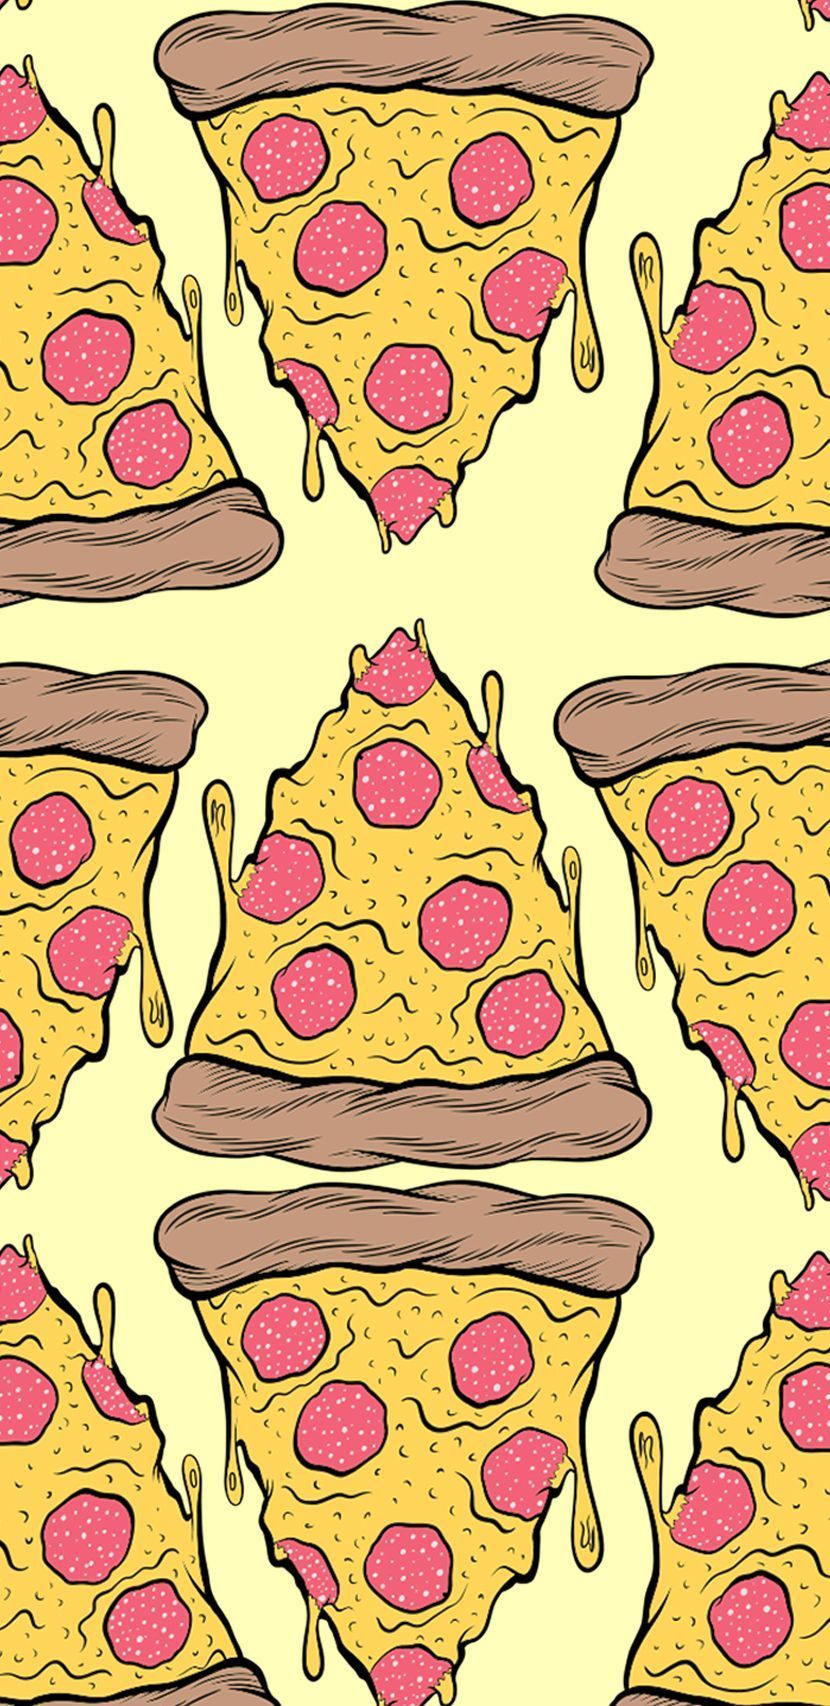 A pattern of pizza slices on a yellow background - Pizza